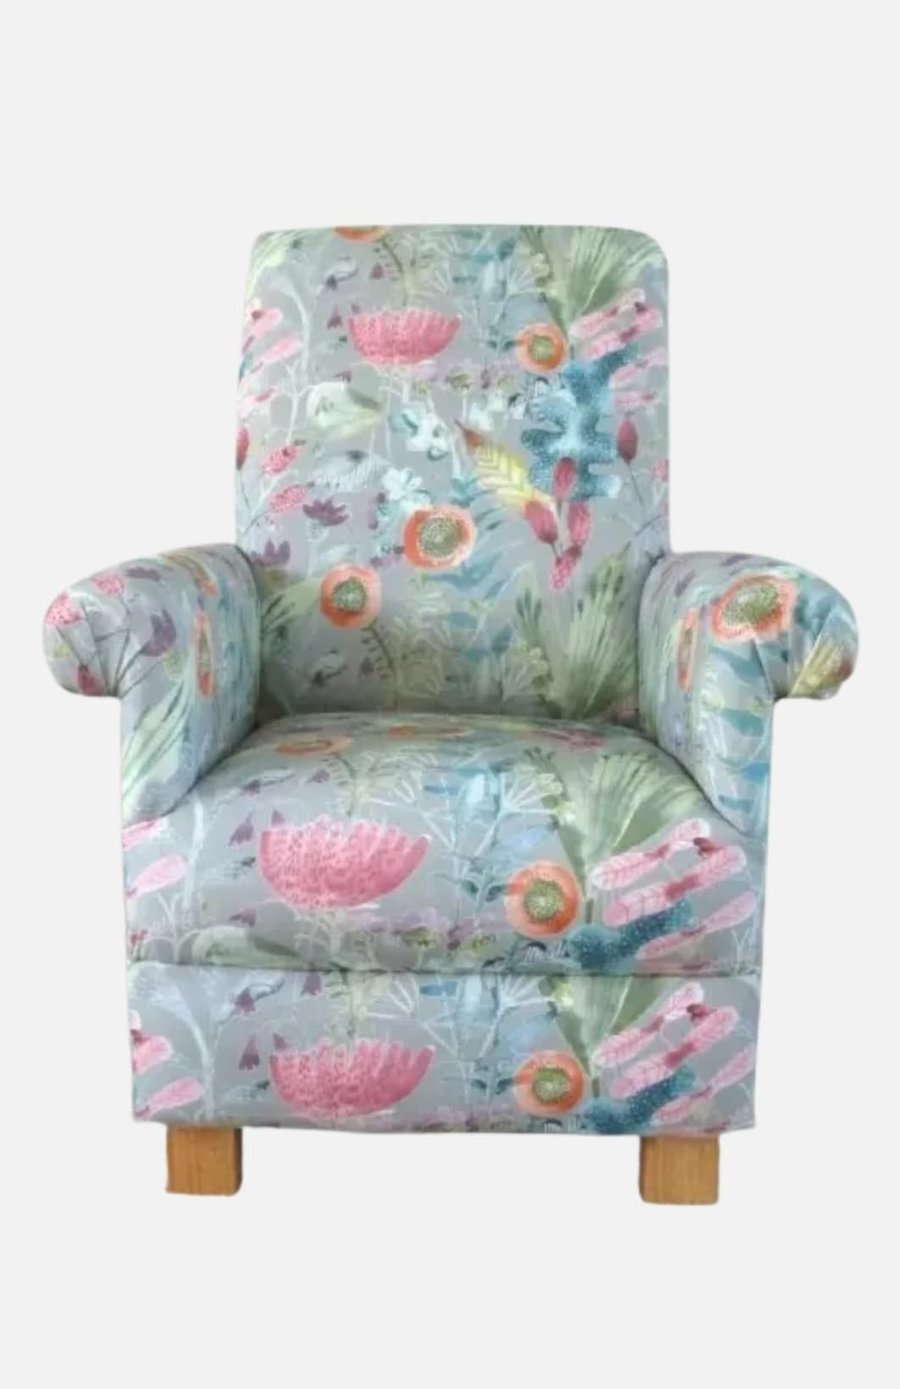 Voyage Maizey Fabric Kids Chair Girls Floral Armchair Pink Lilac Botanical Seat